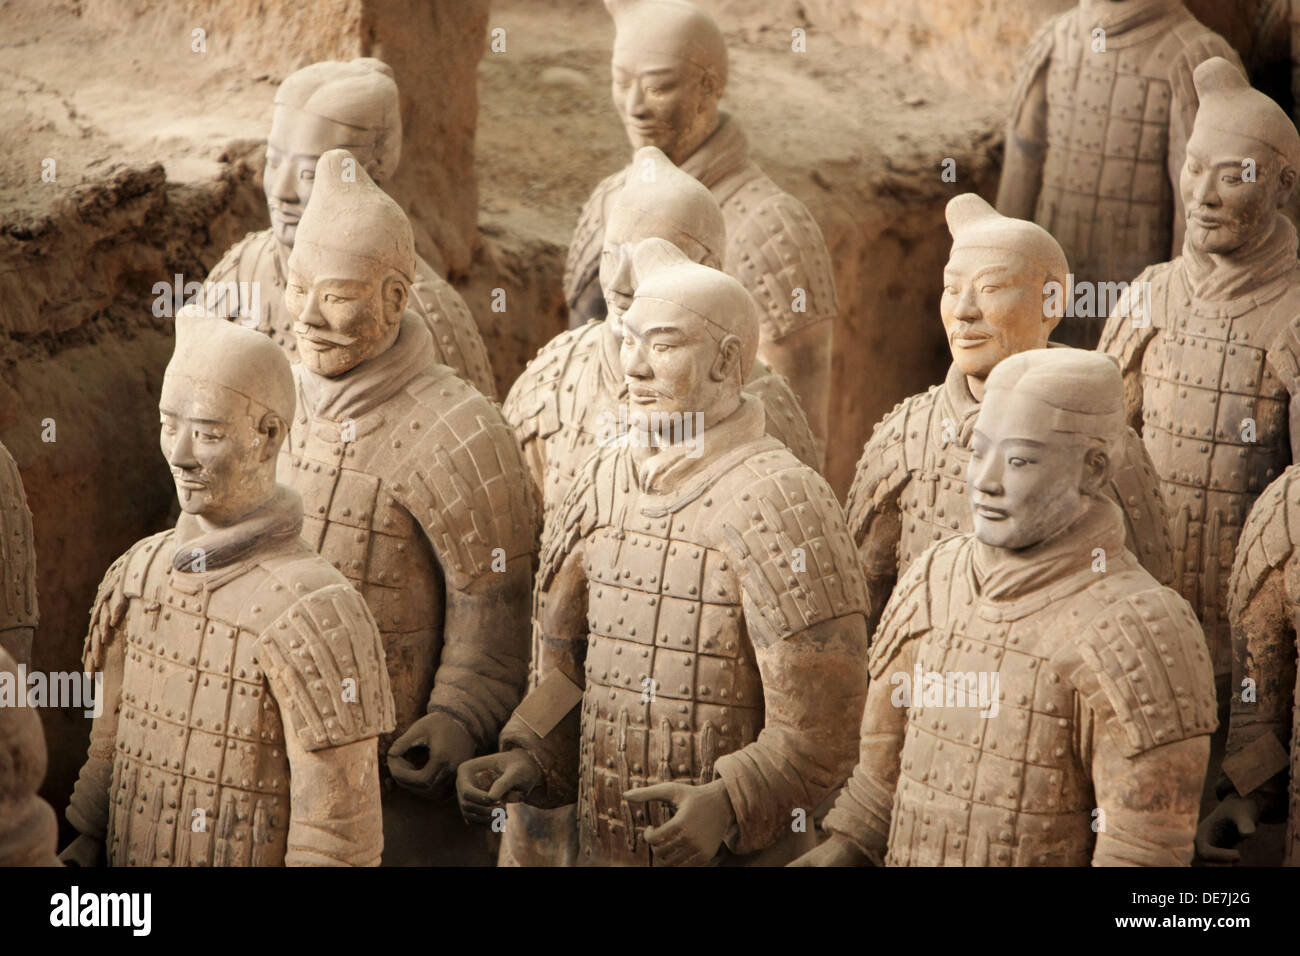 Terracotta warriors from excavations of Emperor Qin´s buried army at Qinshihuang´s museum. Xian, Shaanxi, China Stock Photo